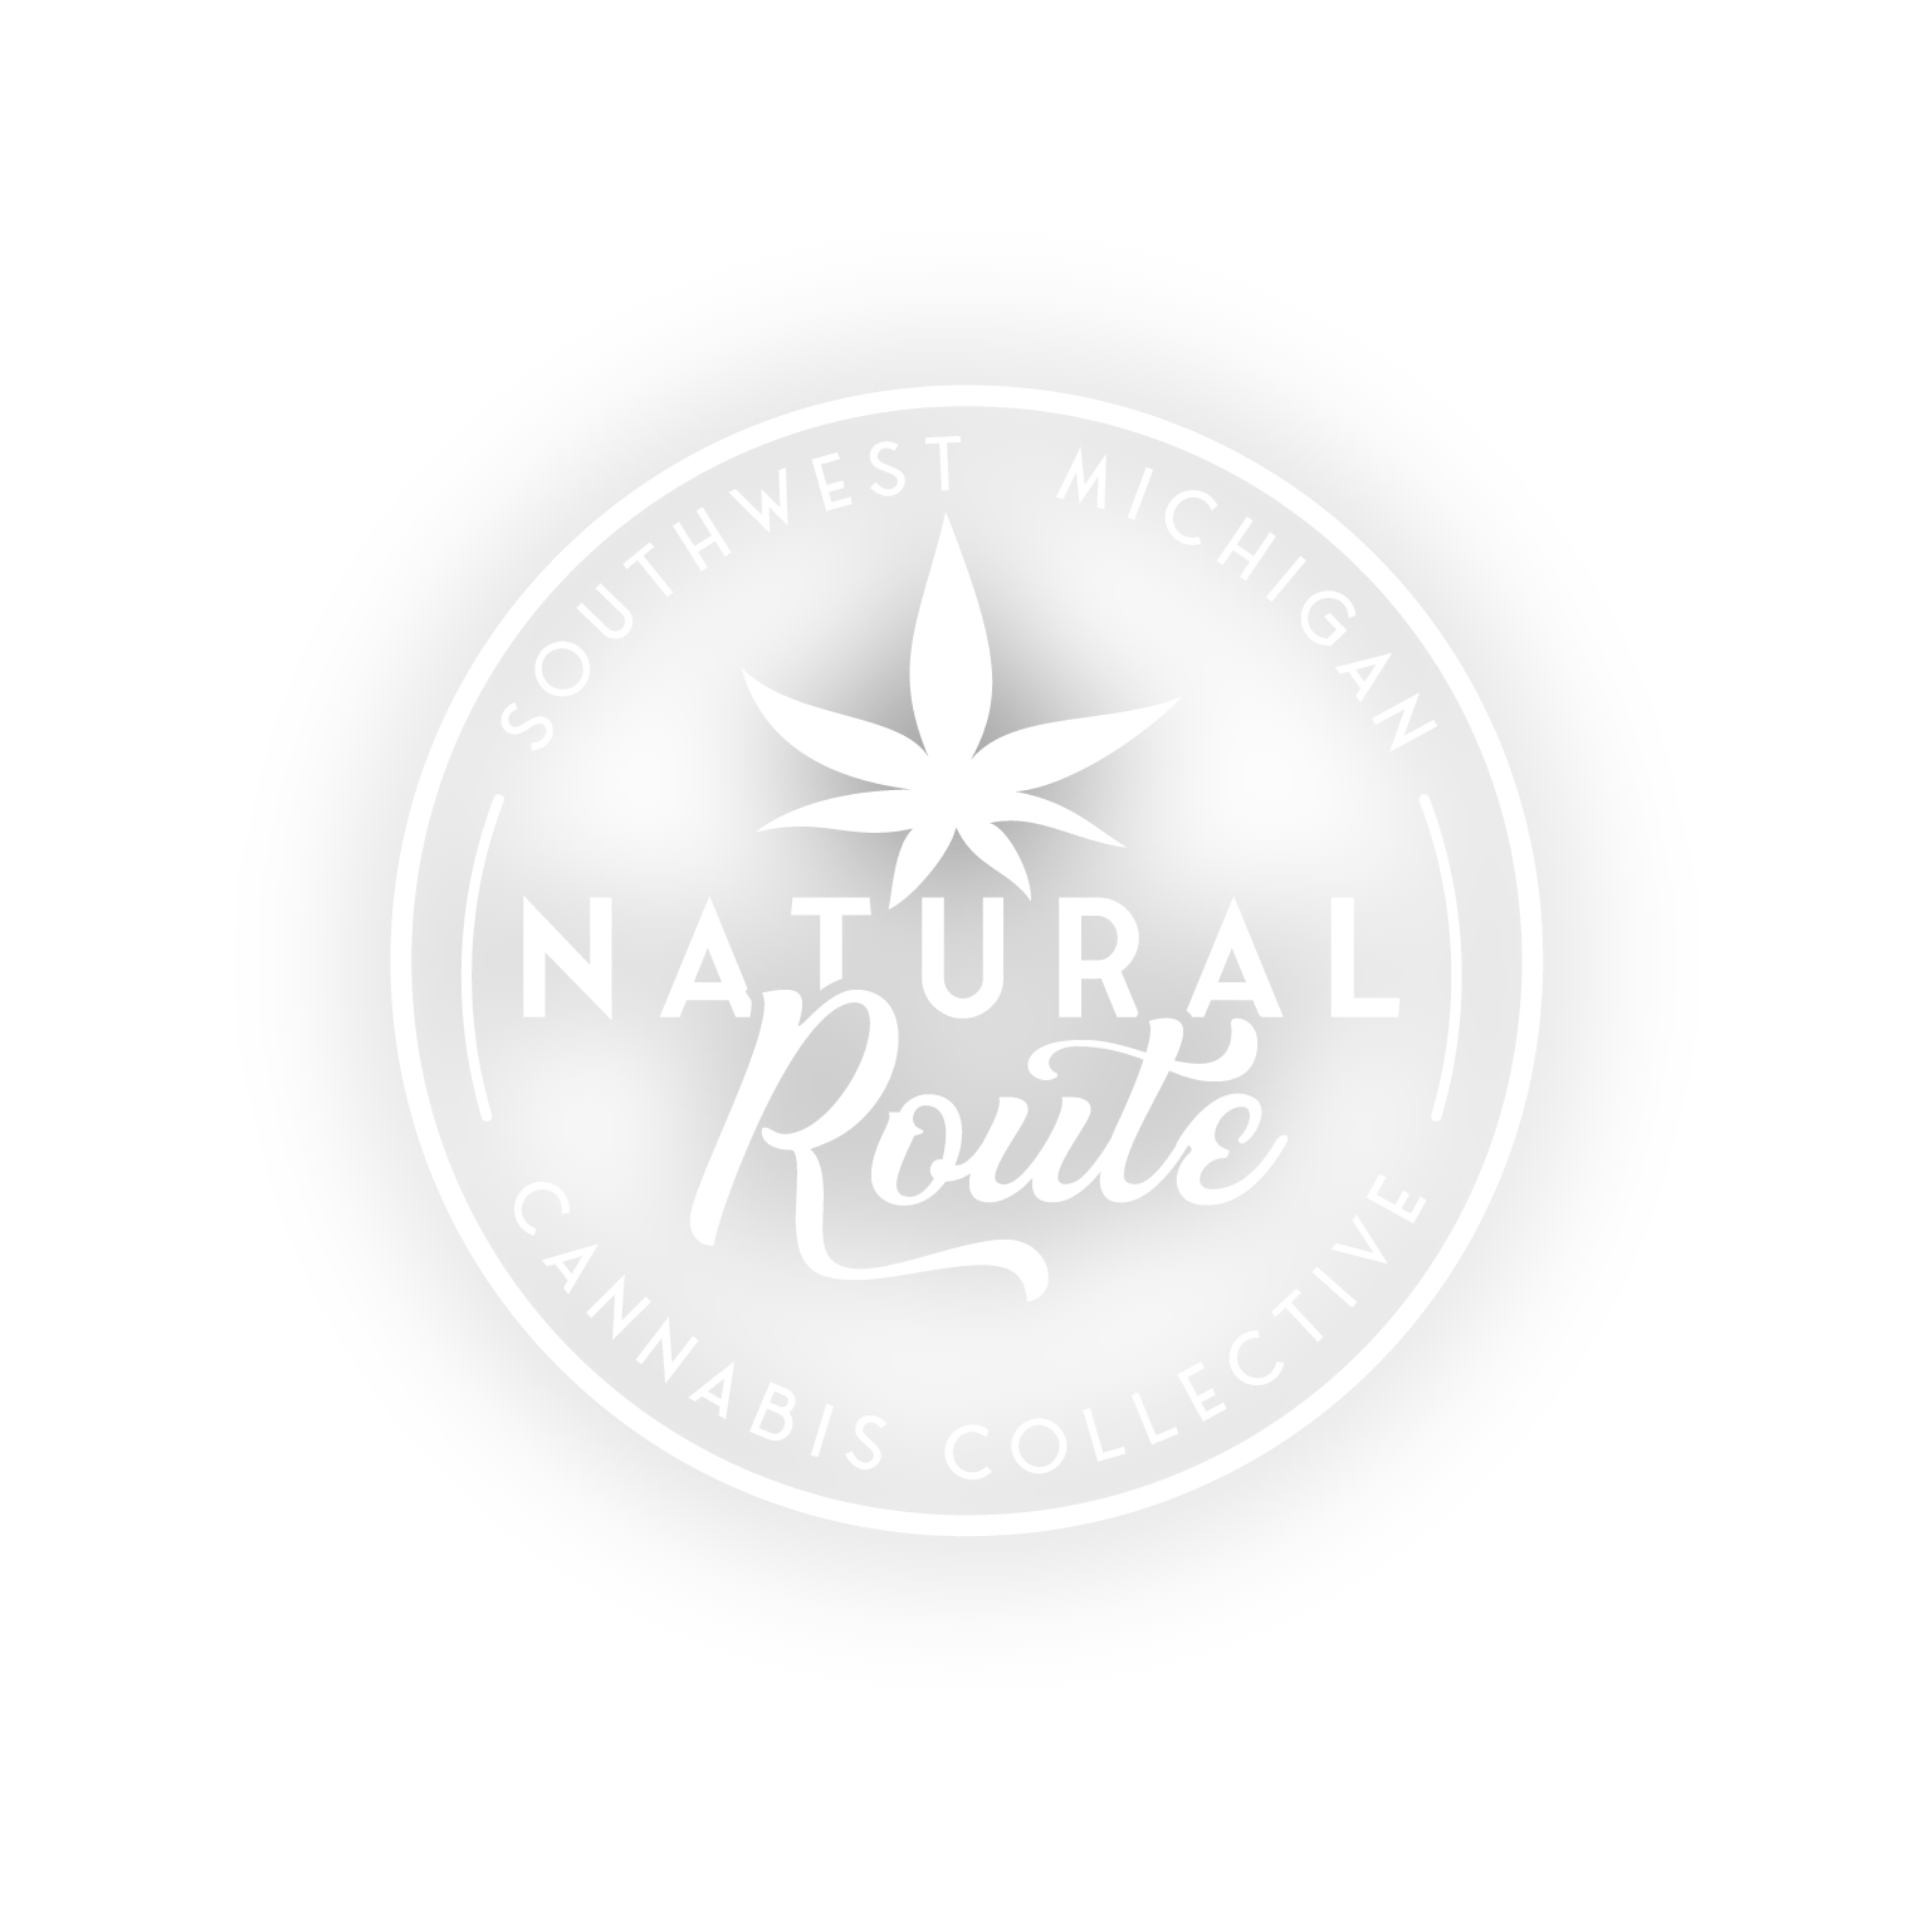 Natural Route Logo: Southwest Michigan Cannabis Collective